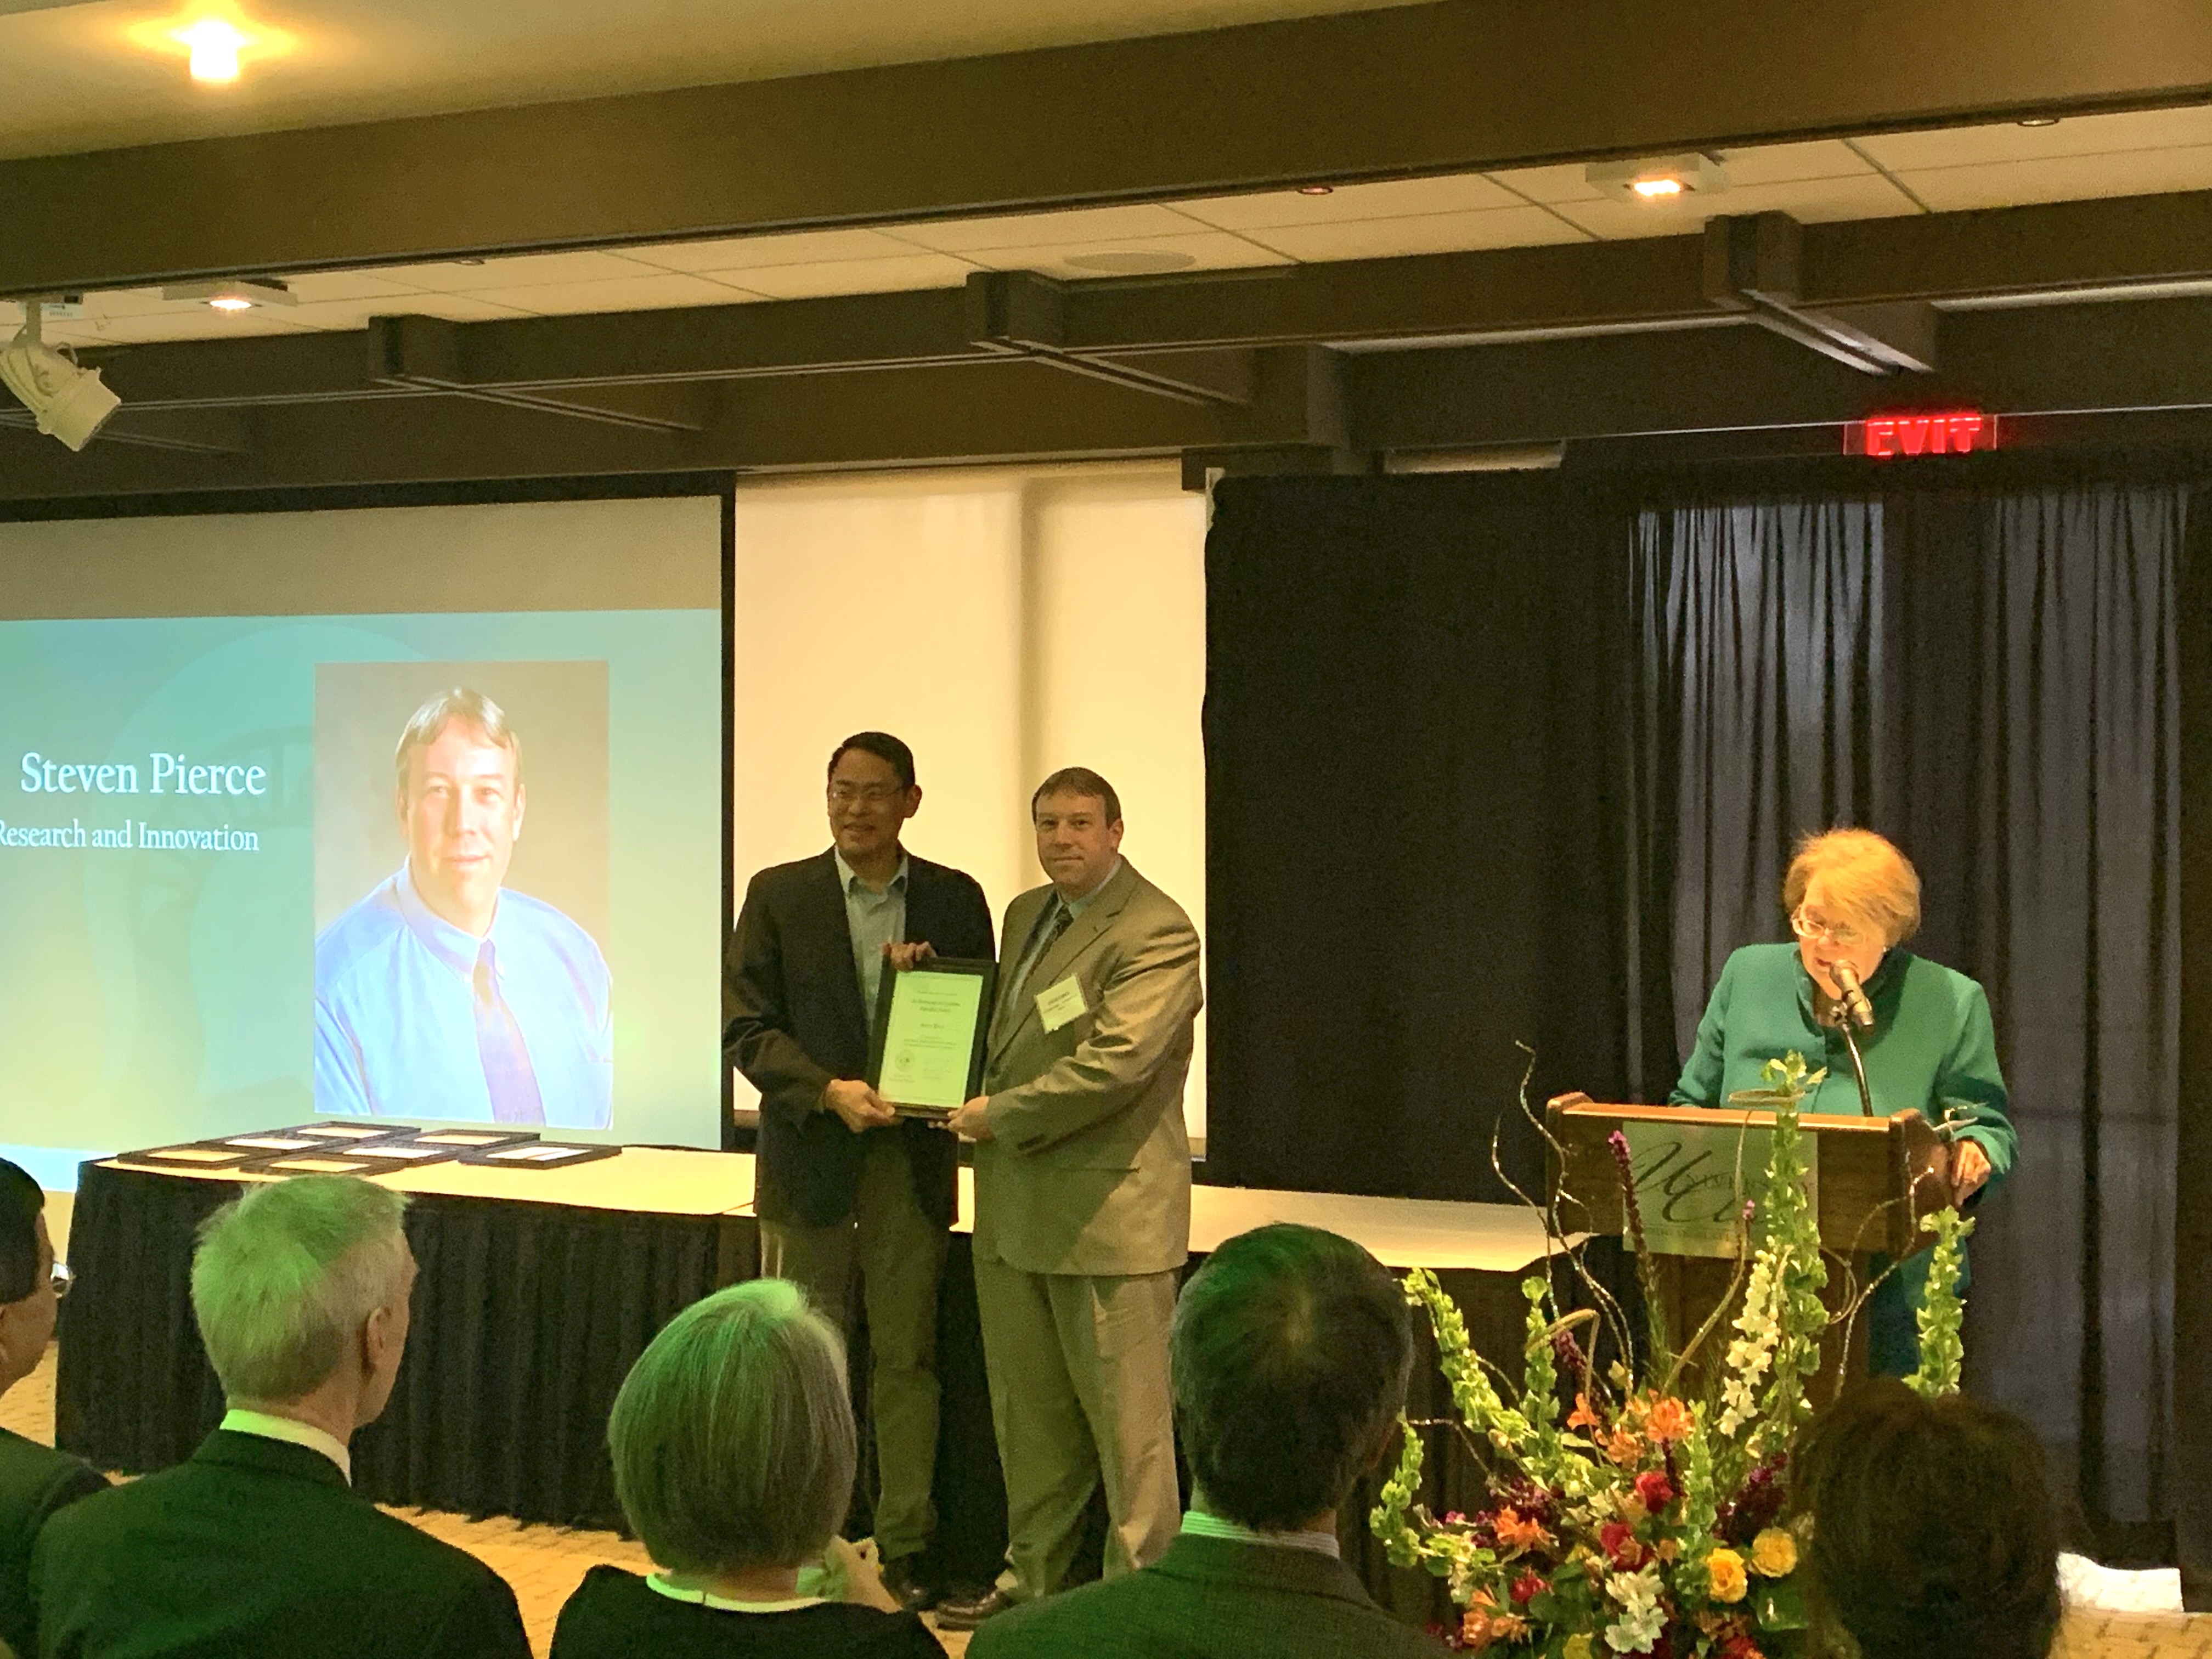 Steven Pierce receives the Distinguished Academic Staff Award at the award ceremony.